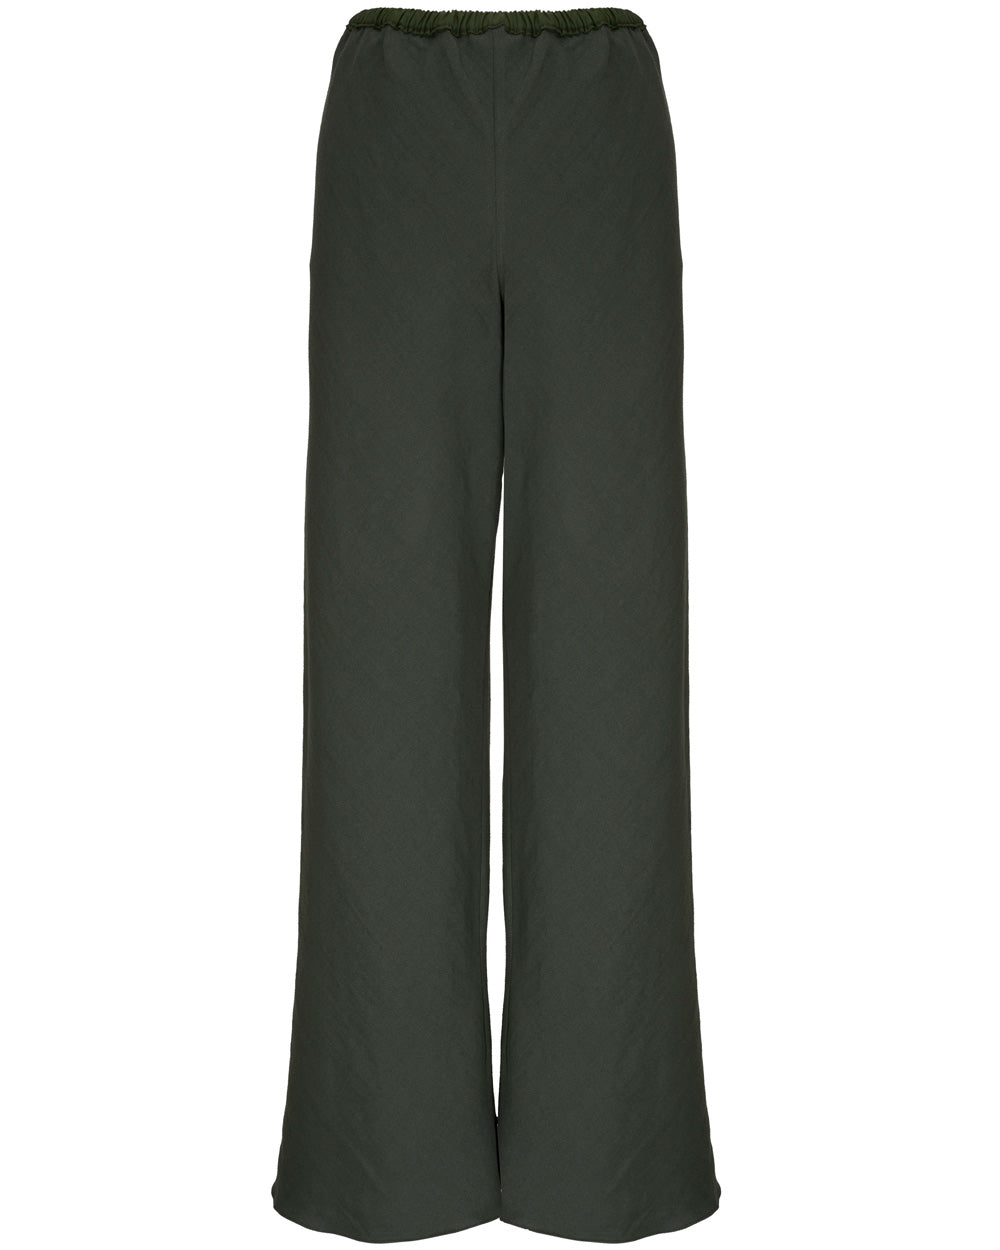 Green Cropped Pant